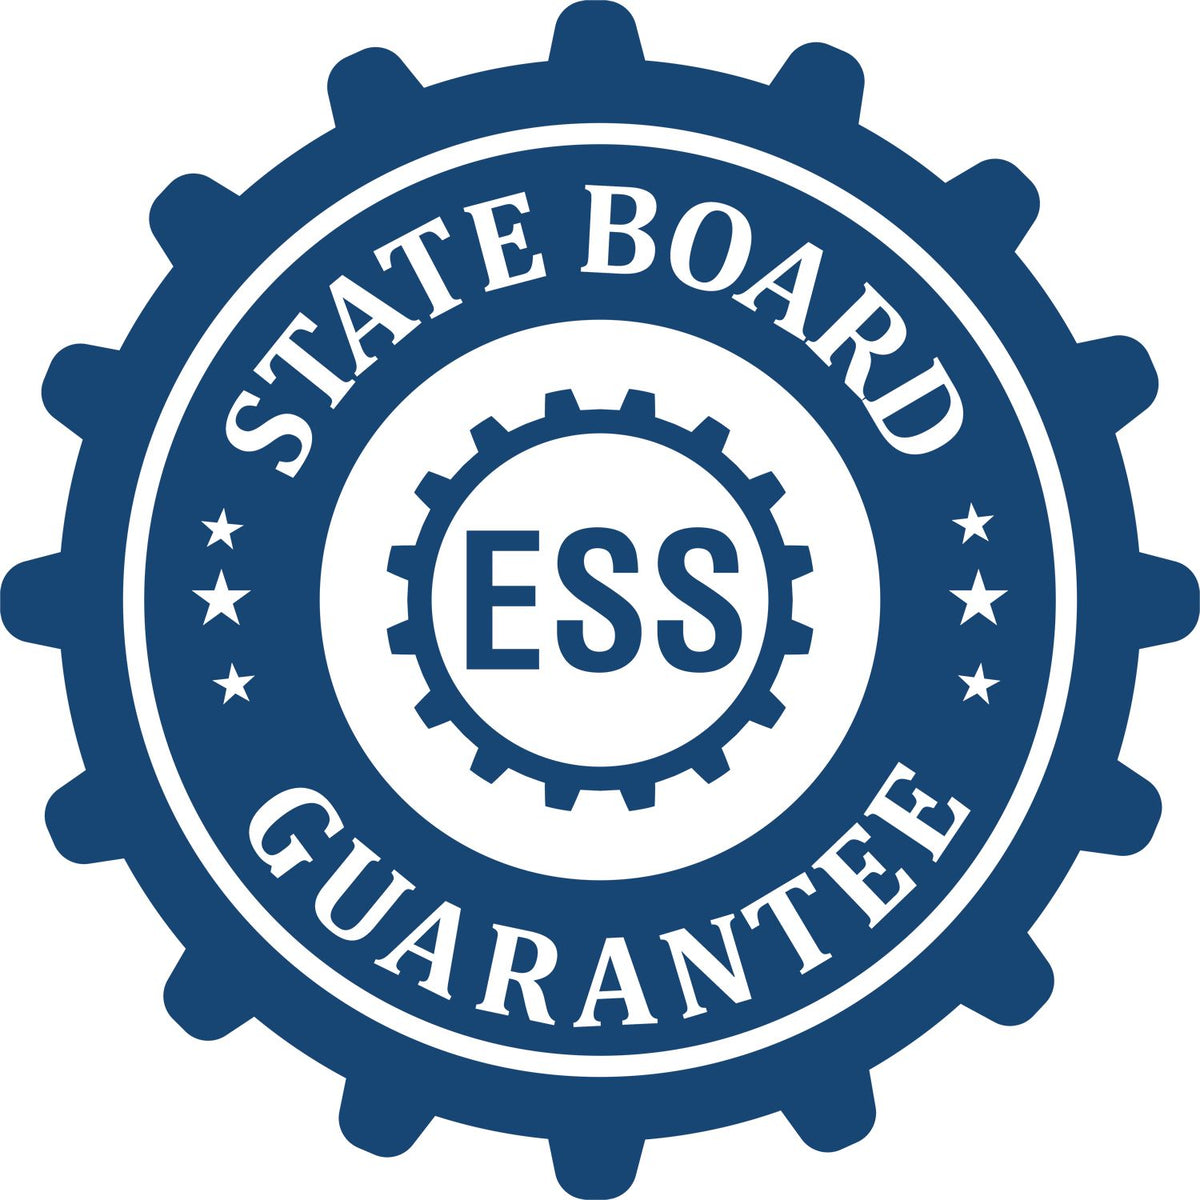 An emblem in a gear shape illustrating a state board guarantee for the Colorado Professional Geologist Seal Stamp